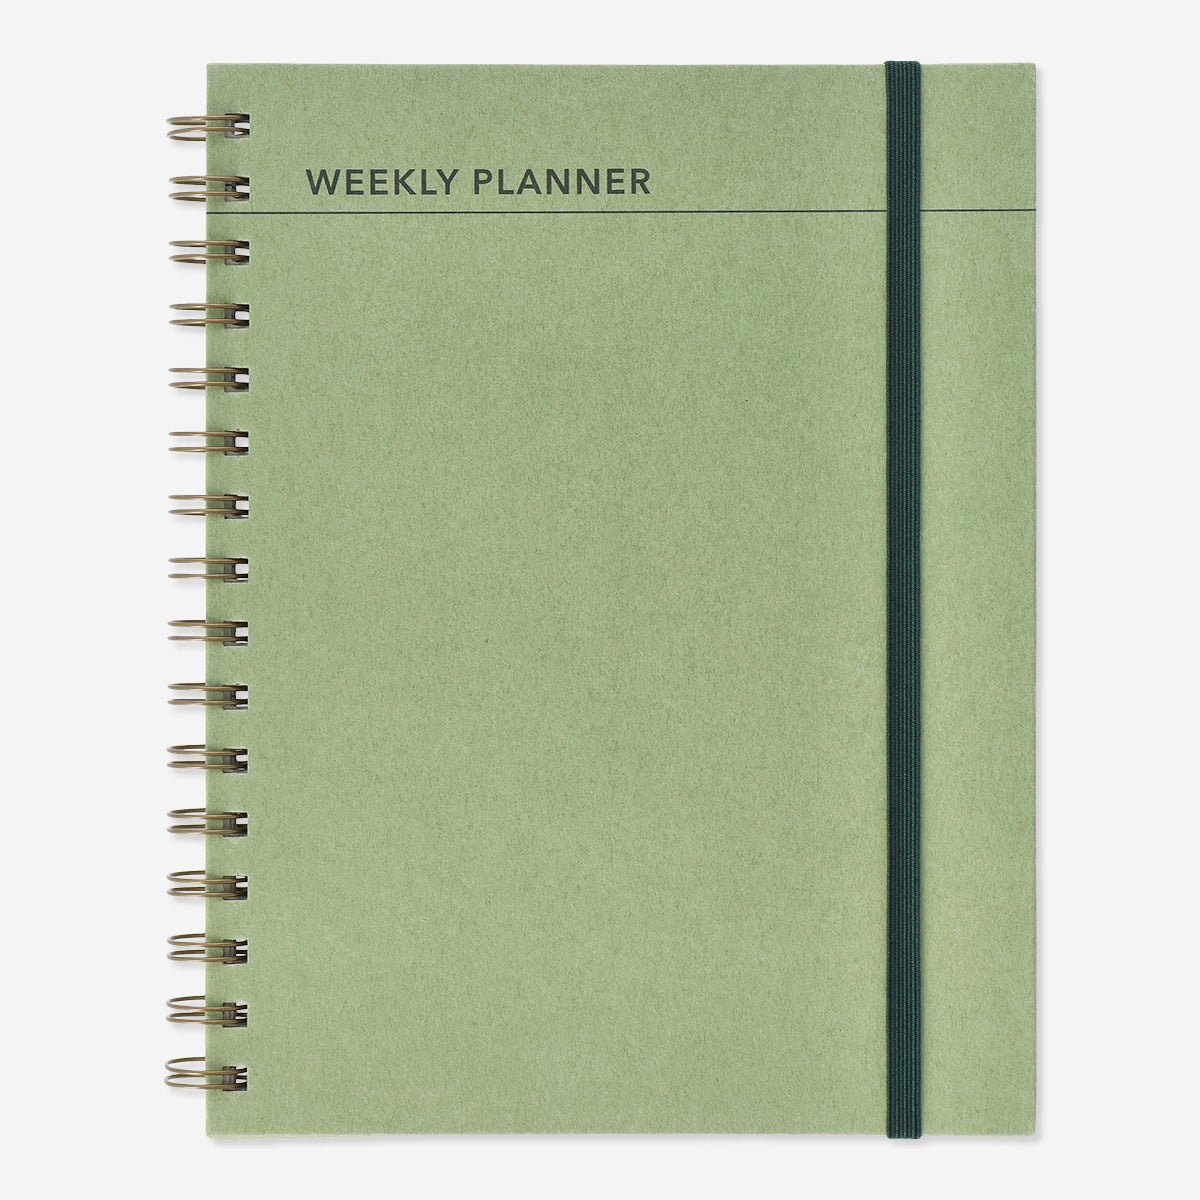 Study planner with weekly diary. A5 £6| Flying Tiger Copenhagen